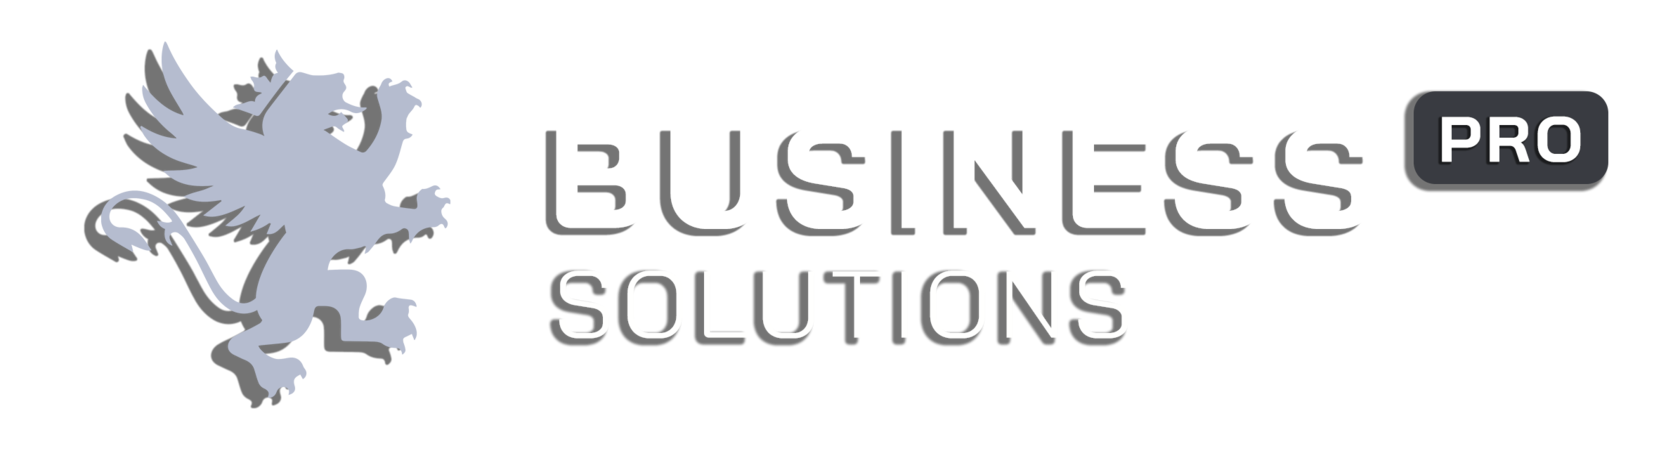 Business PRO&nbsp;® Solutions